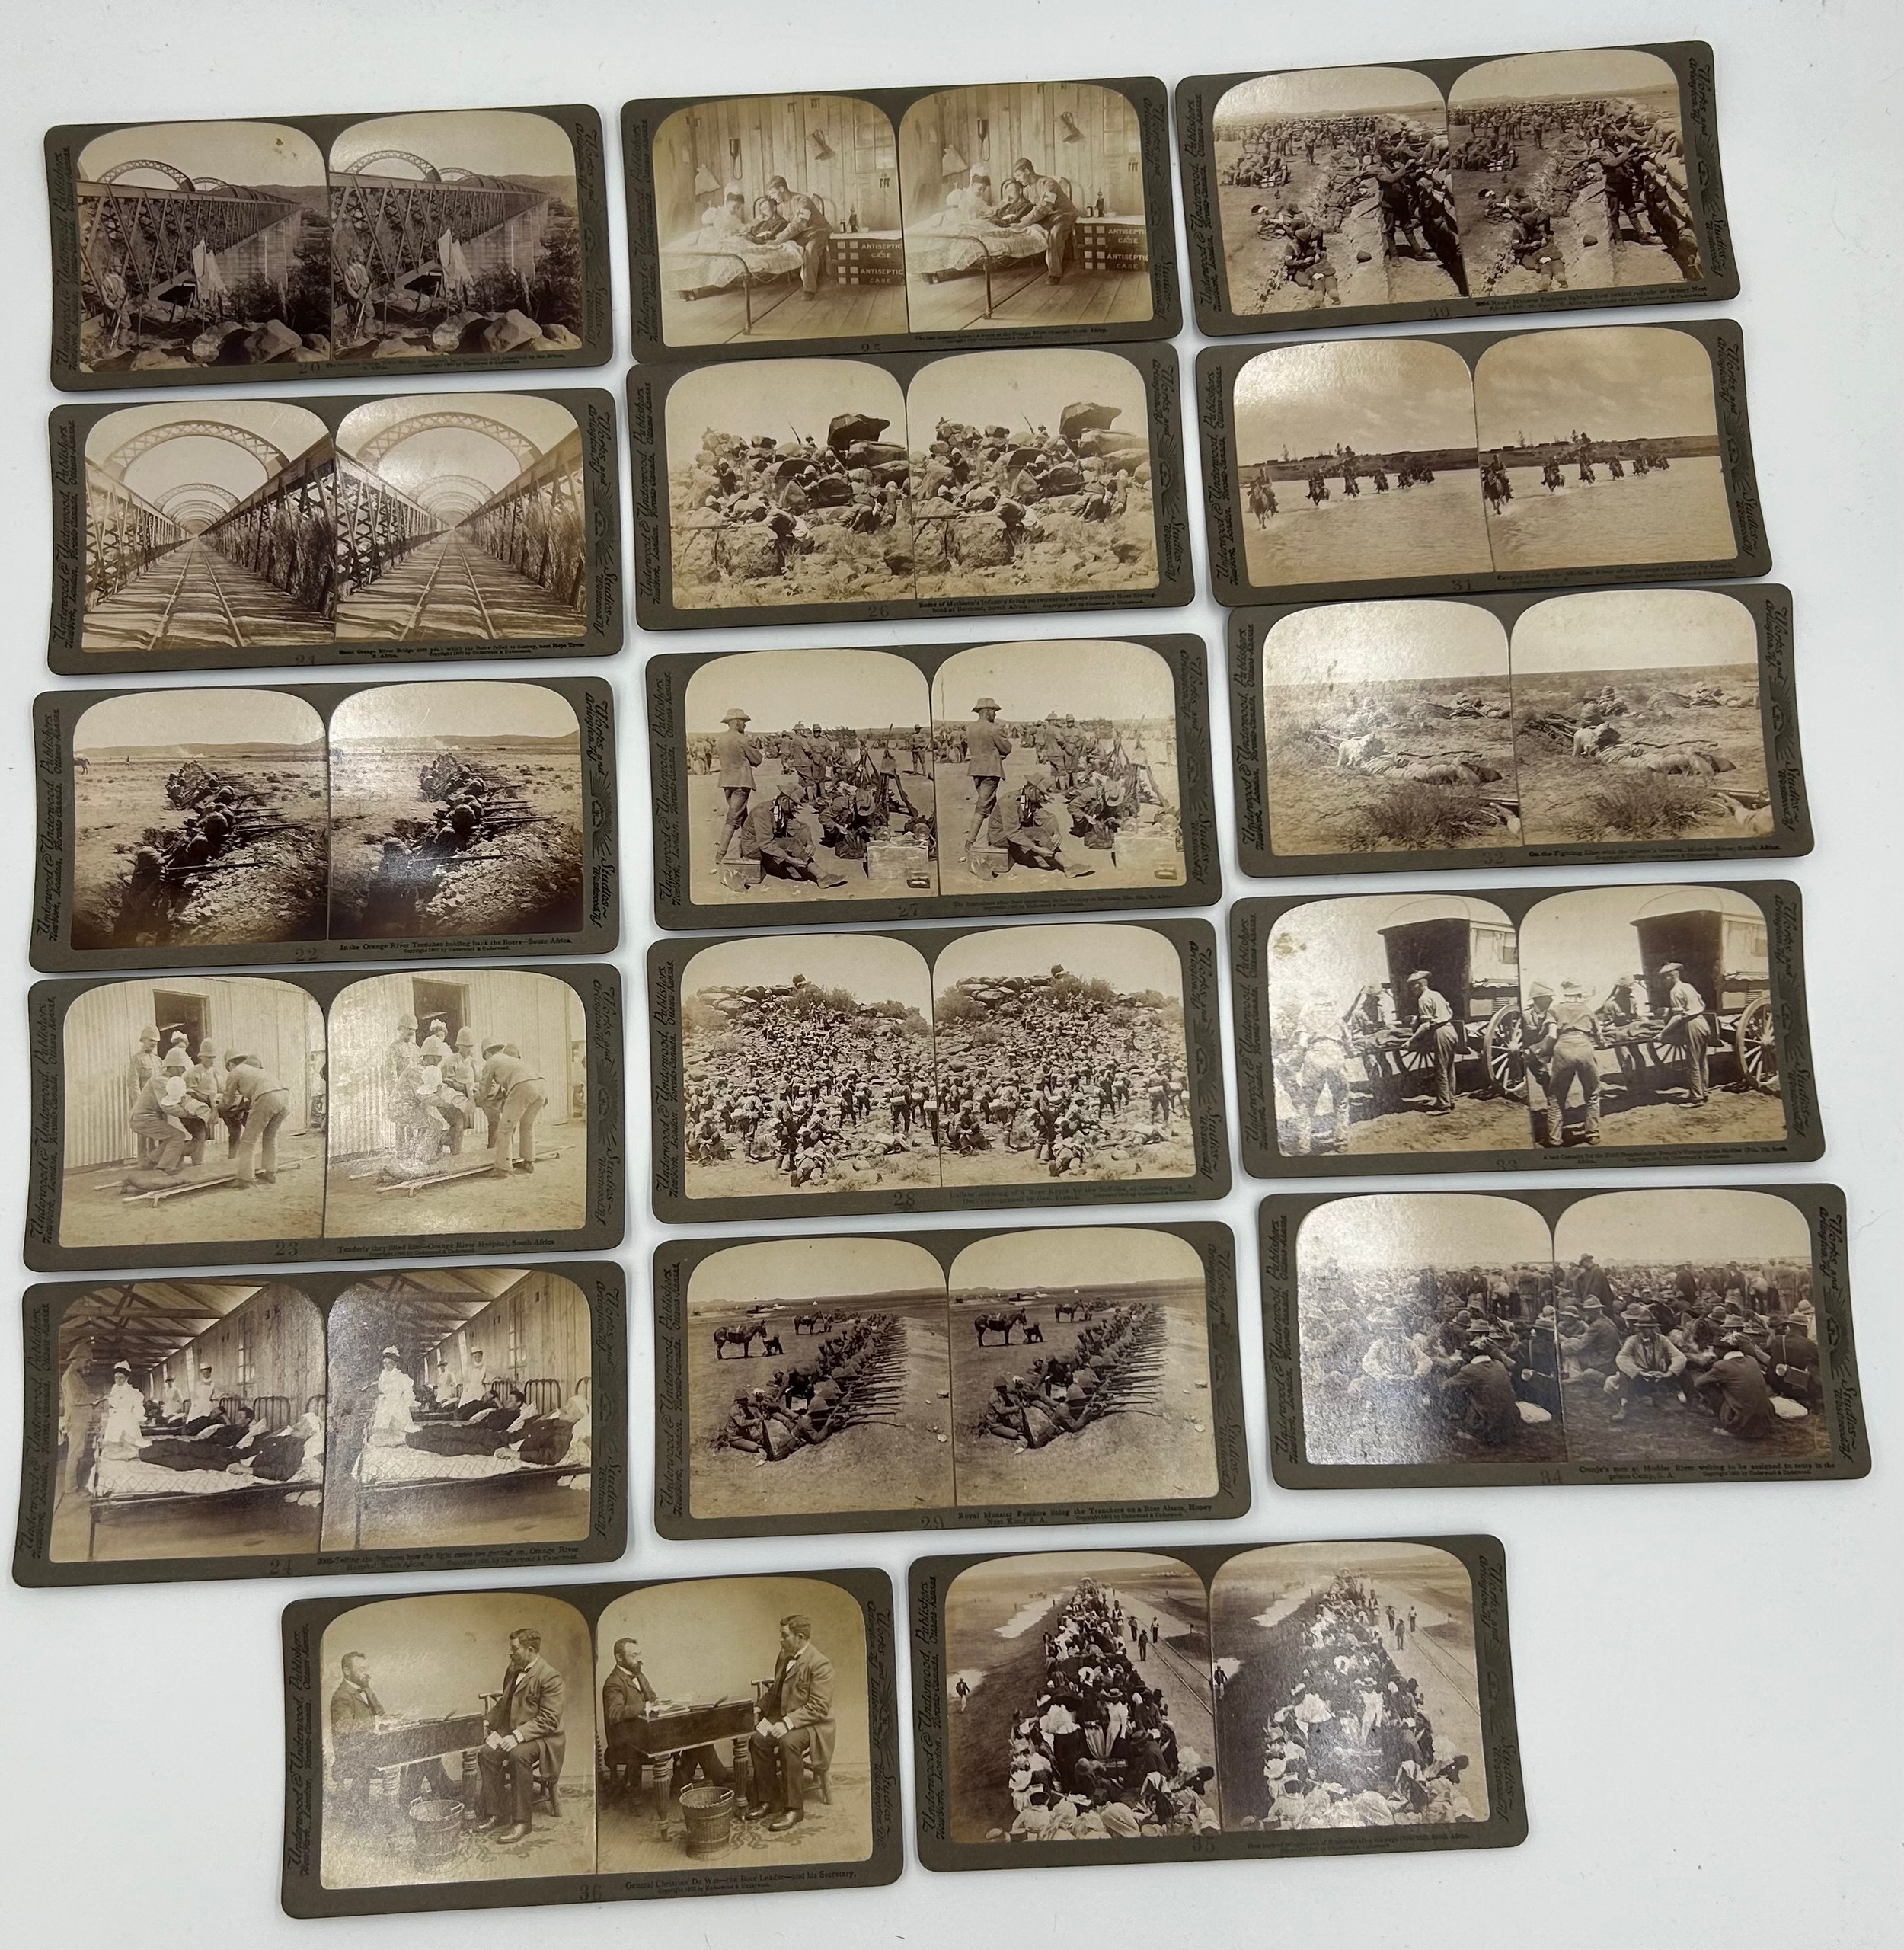 Boer War Interest. 'The South African War through the Stereoscope' Volume 1 in original fitted box - Image 6 of 13